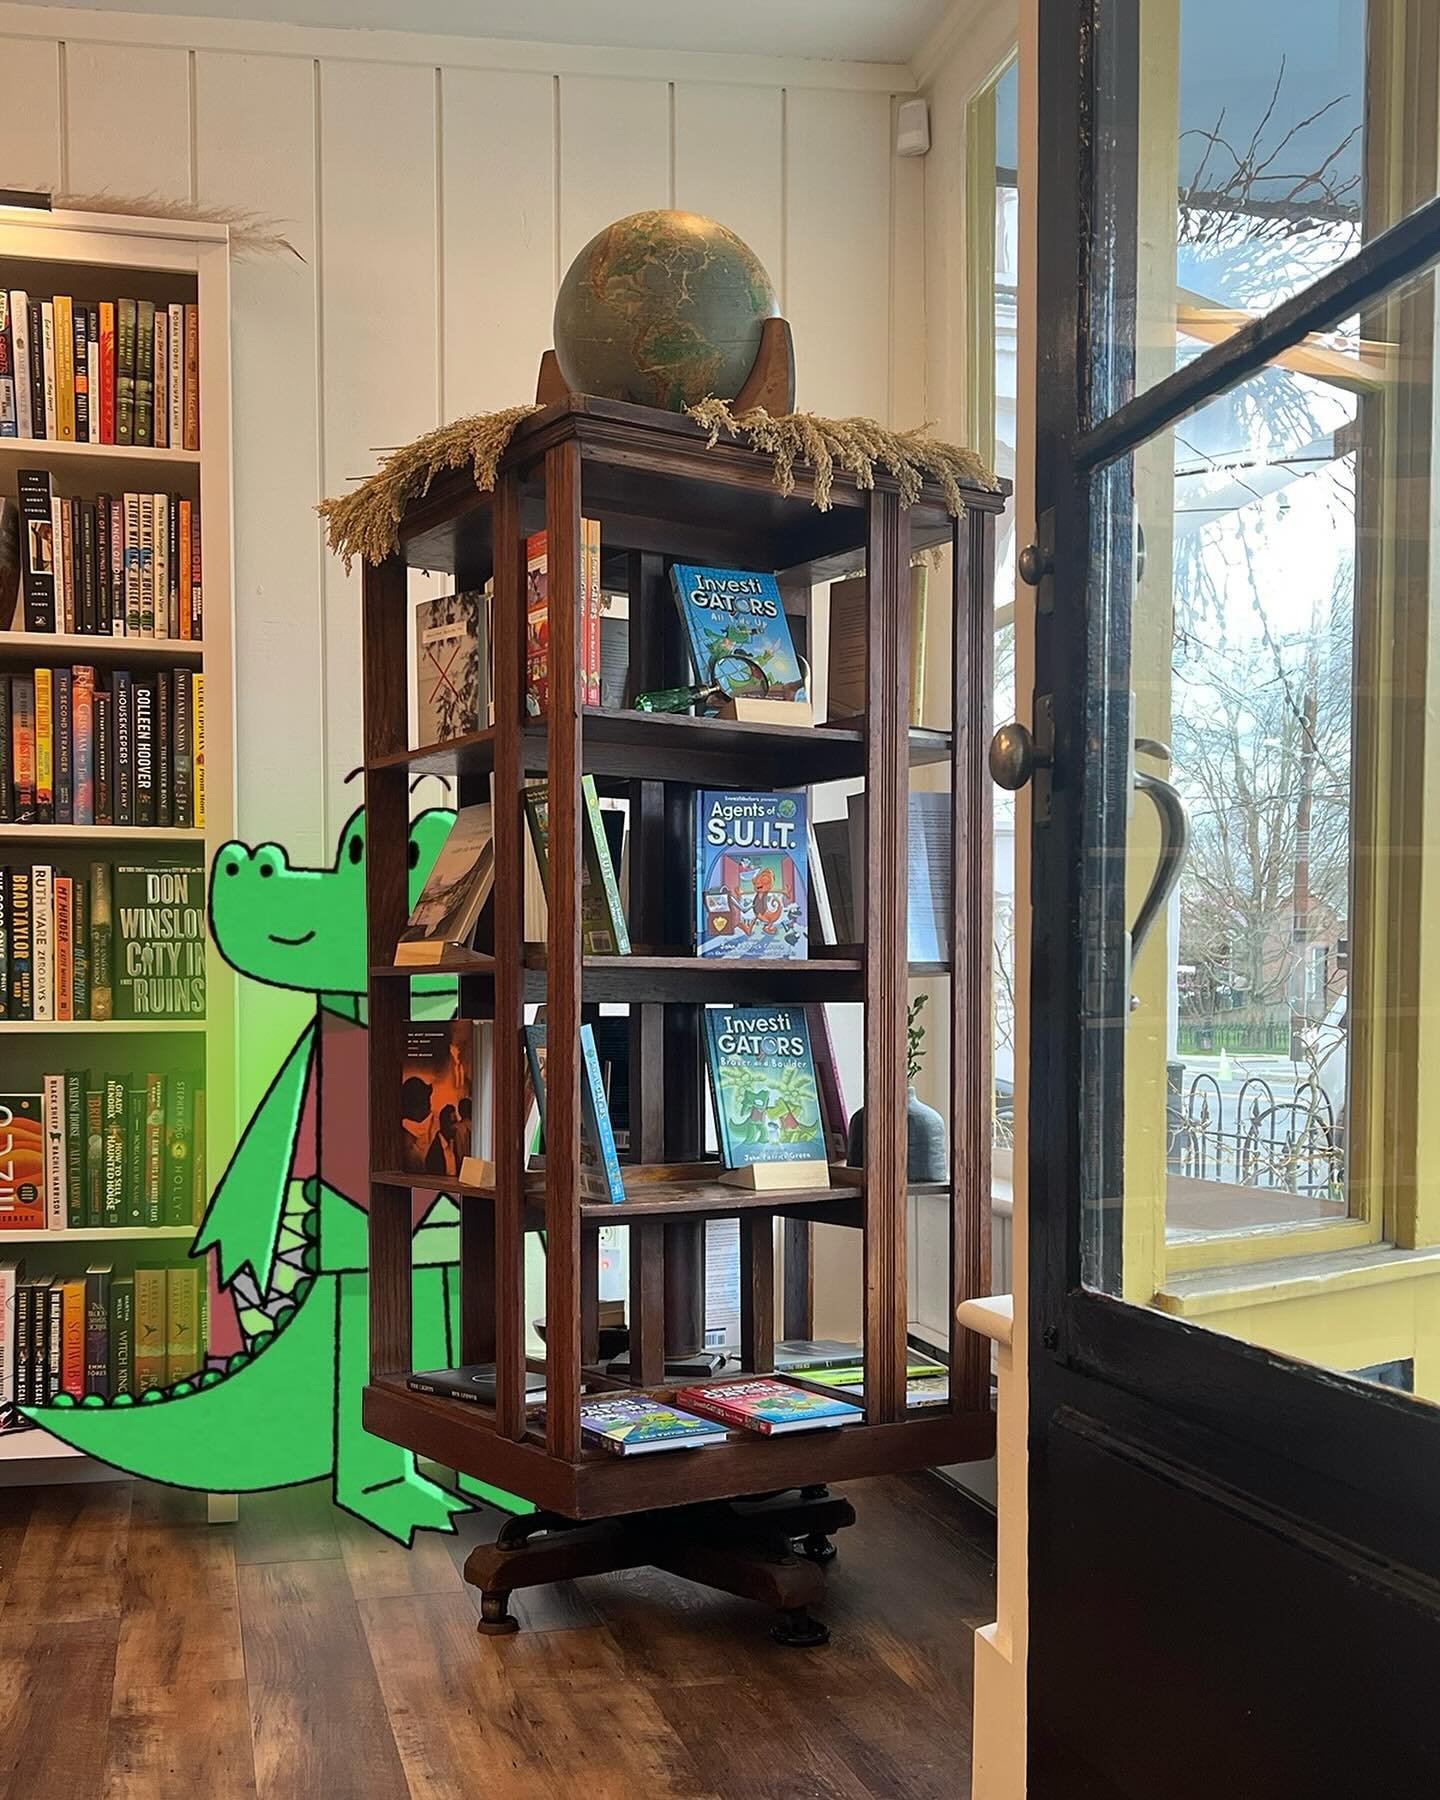 OK, Kinderhook&rsquo;s top agents, currently undercover as Very Serious Booksellers: This is not the training simulator! We still haven&rsquo;t solved the mystery of who&rsquo;s coming to our event on Friday, May 3. If we don&rsquo;t figure it out in